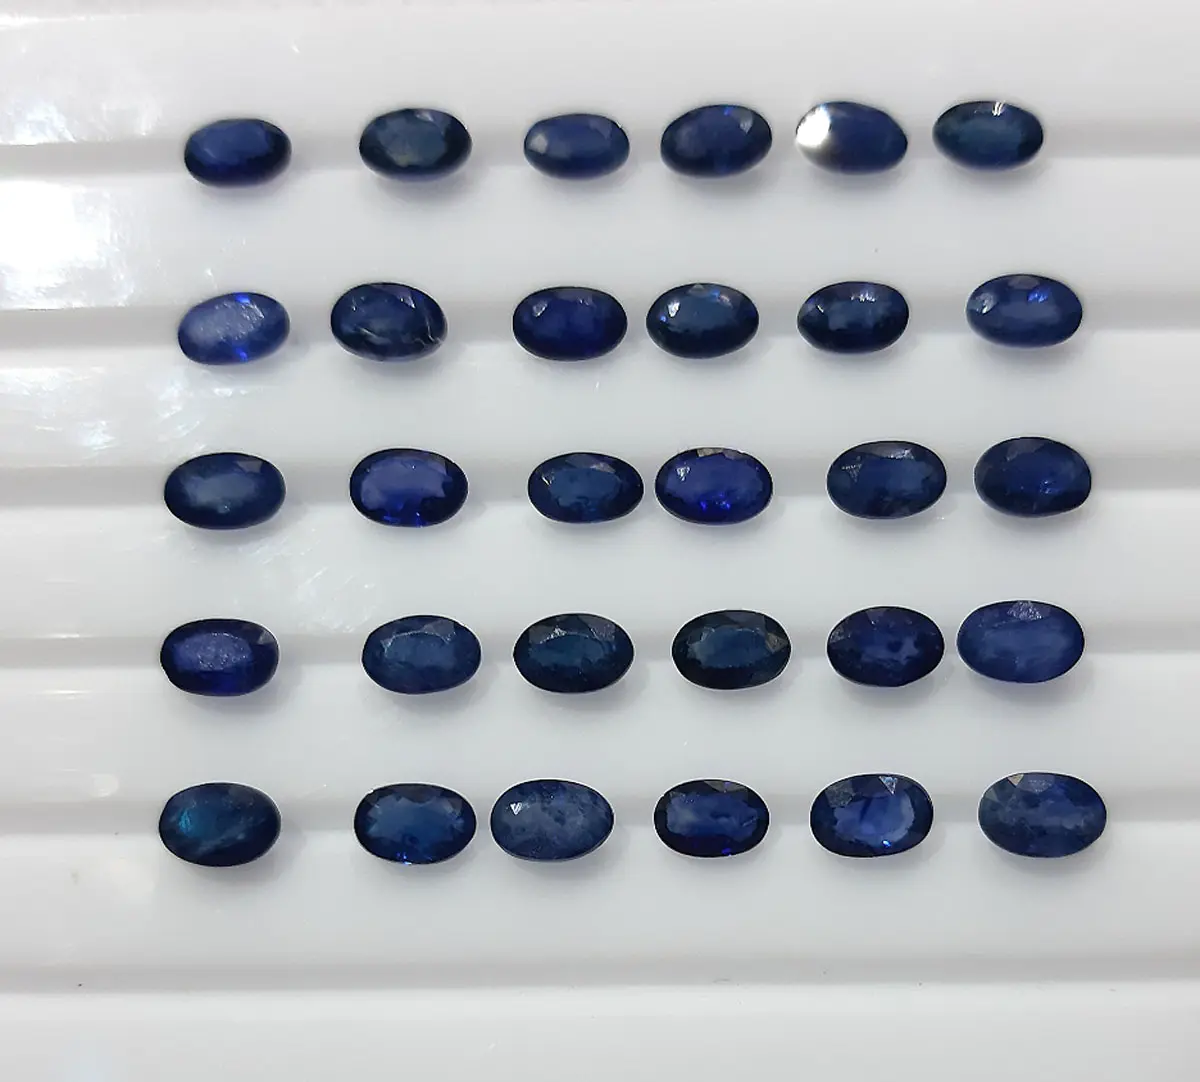 100% Natural Blue Sapphire oval 3x2mm to 12x7mm faceted Loose Gemstone calibrated lot Indian hot design